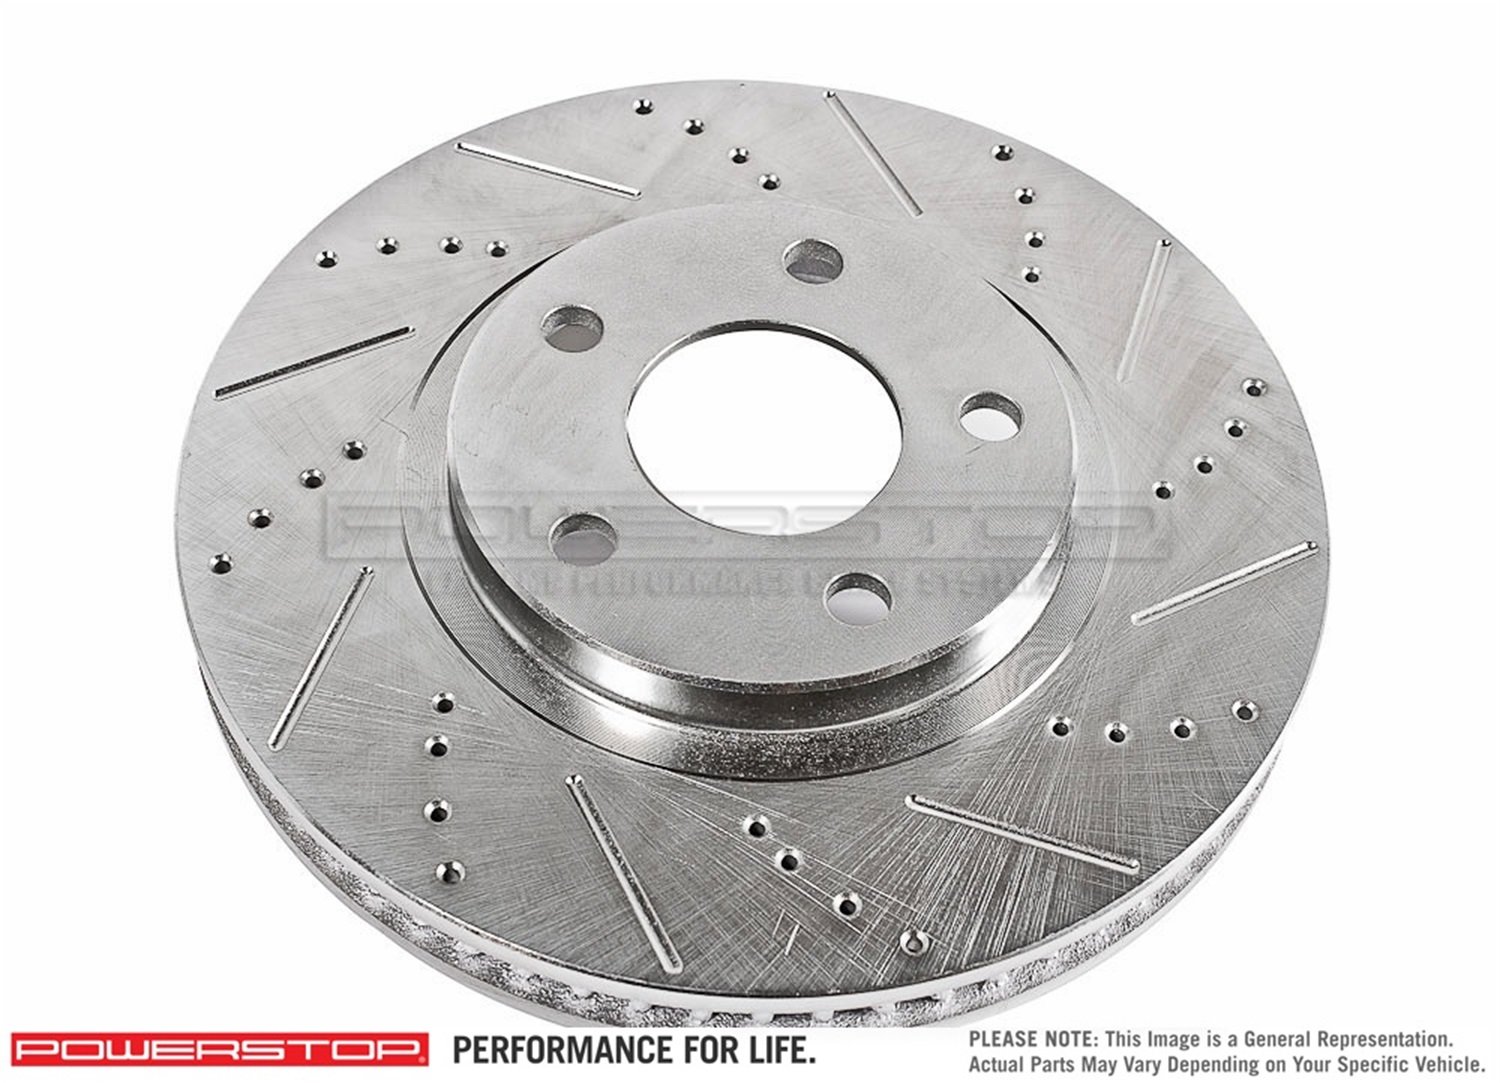 Extreme Performance Drilled And Slotted Brake Rotor Fits Select Late Model Ford F-250, F-350 Models [Rear Right/Passenger Side]